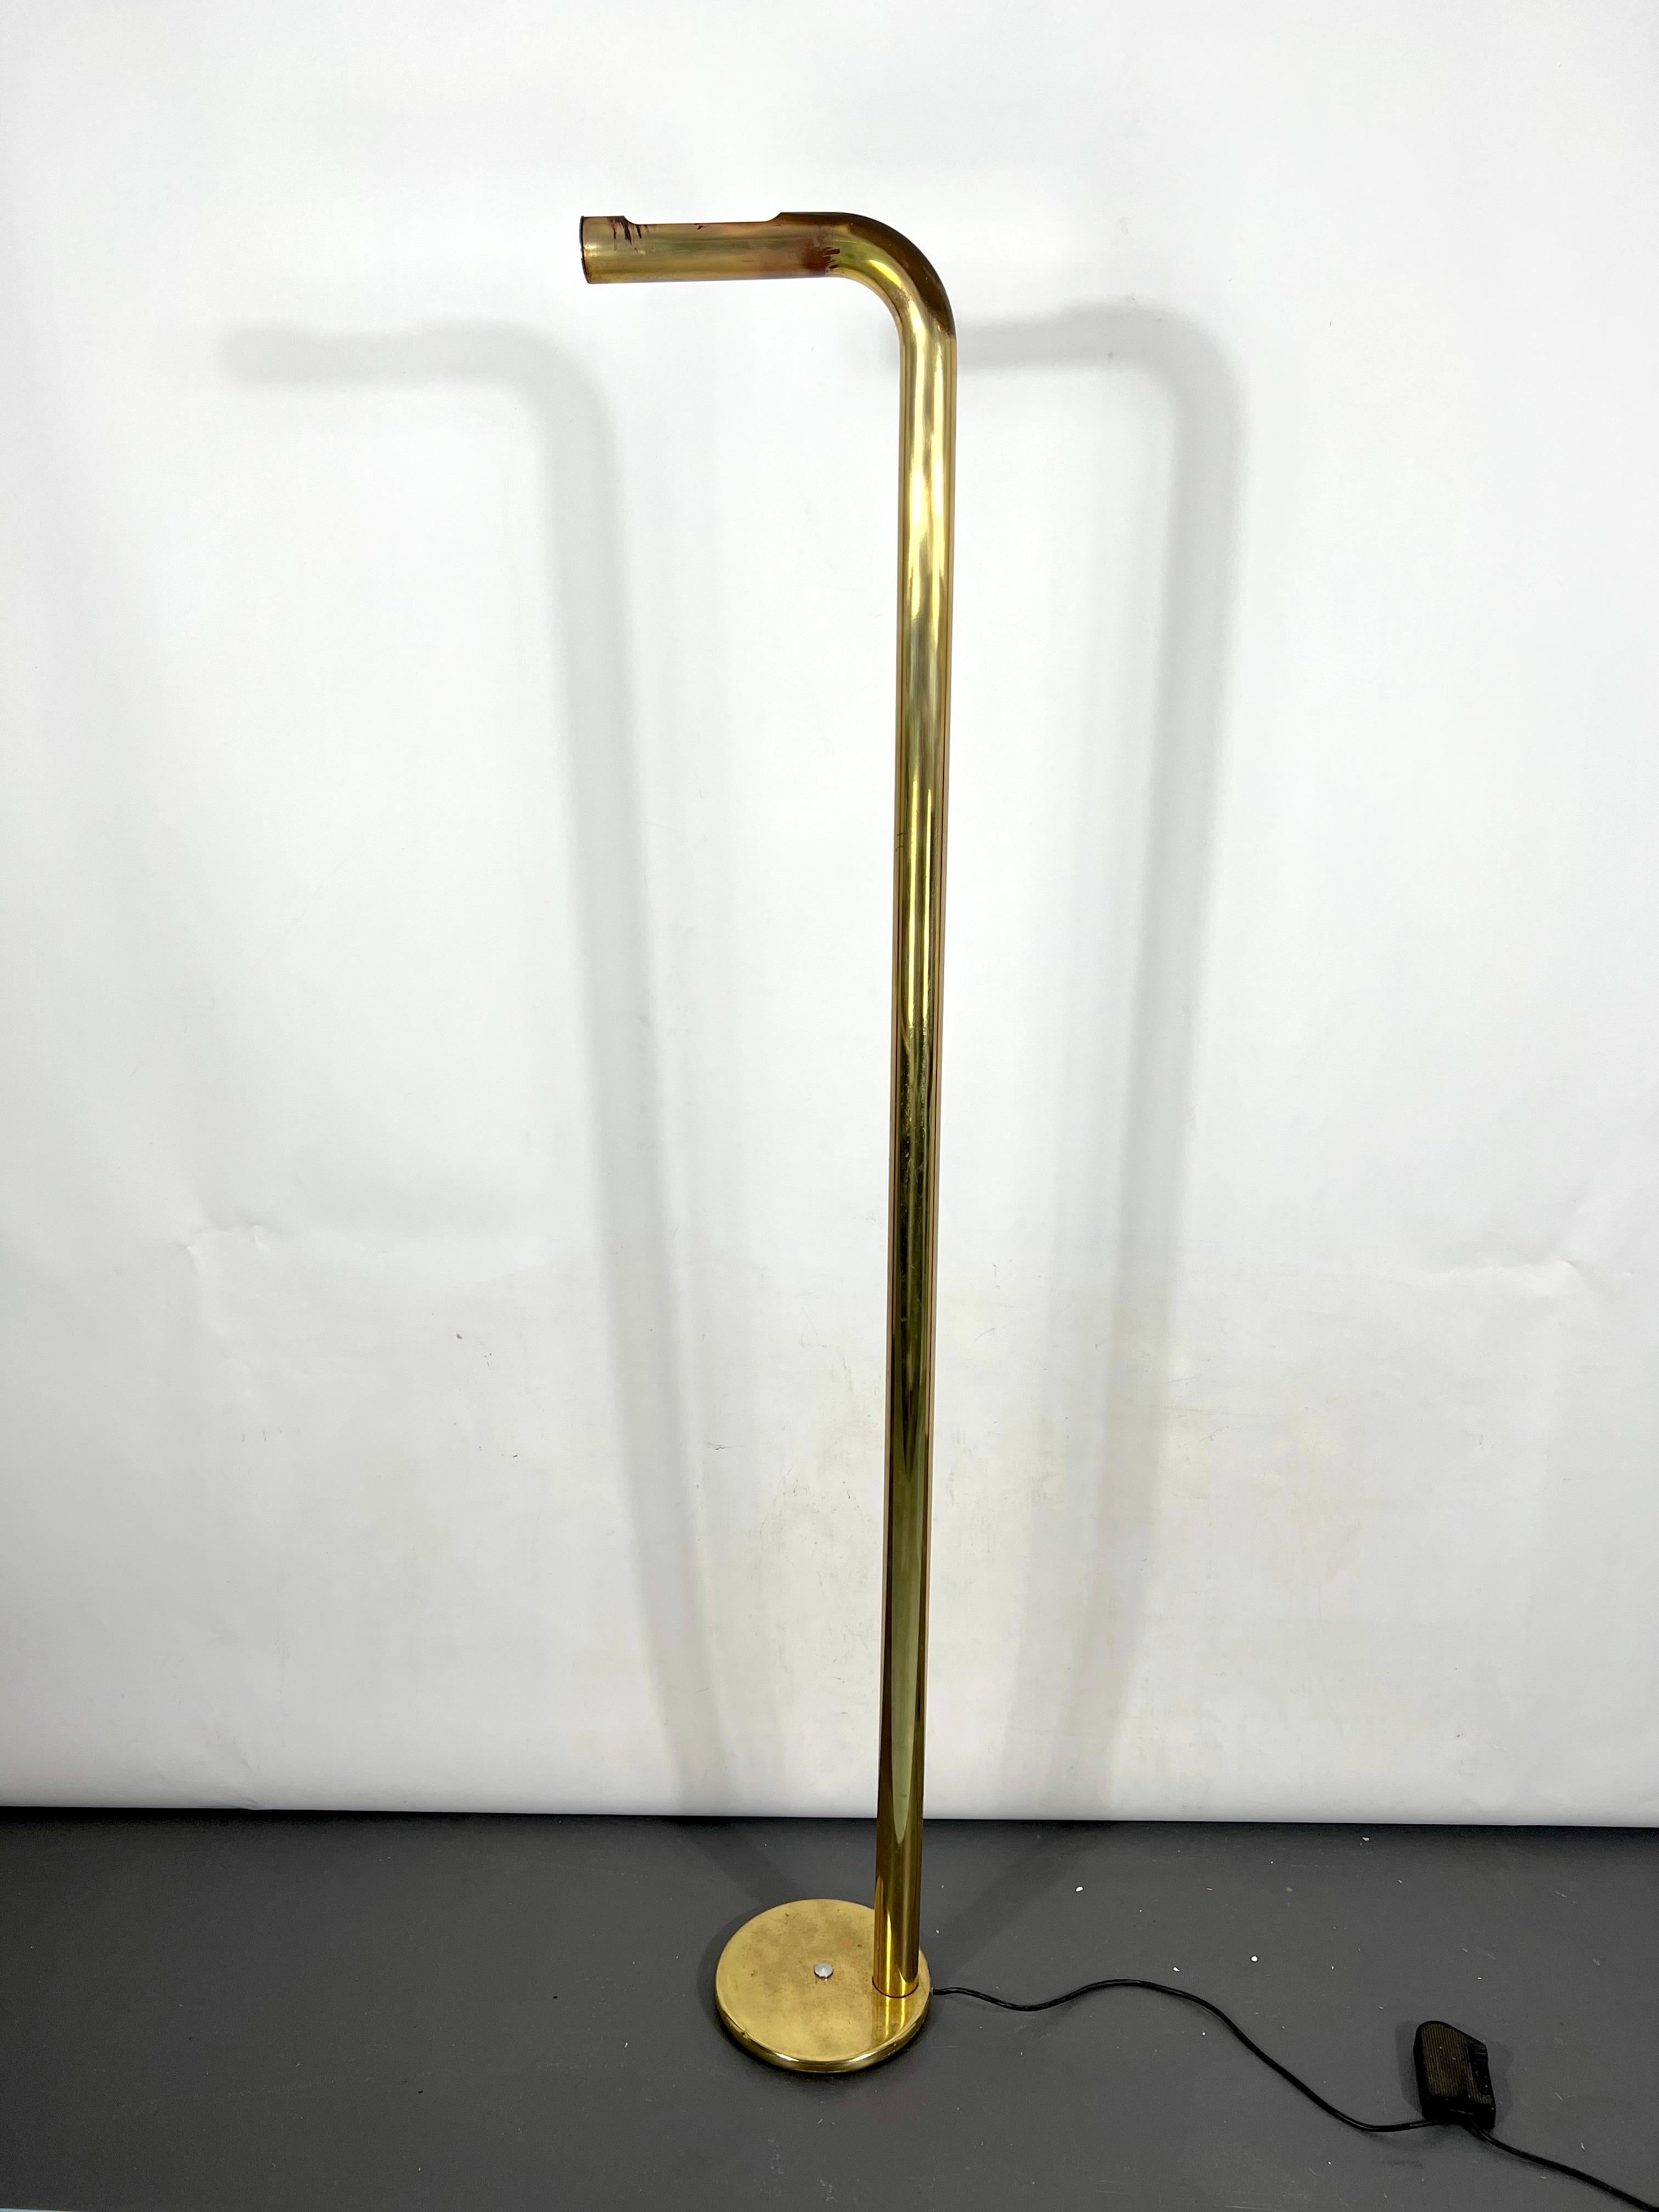 Vintage condition with evident trace of age and use on the brass for this halogen floor lamp produced in Italy during the 70s and made from solid brass. Full working with EU standard, adaptable on demand for USA standard.